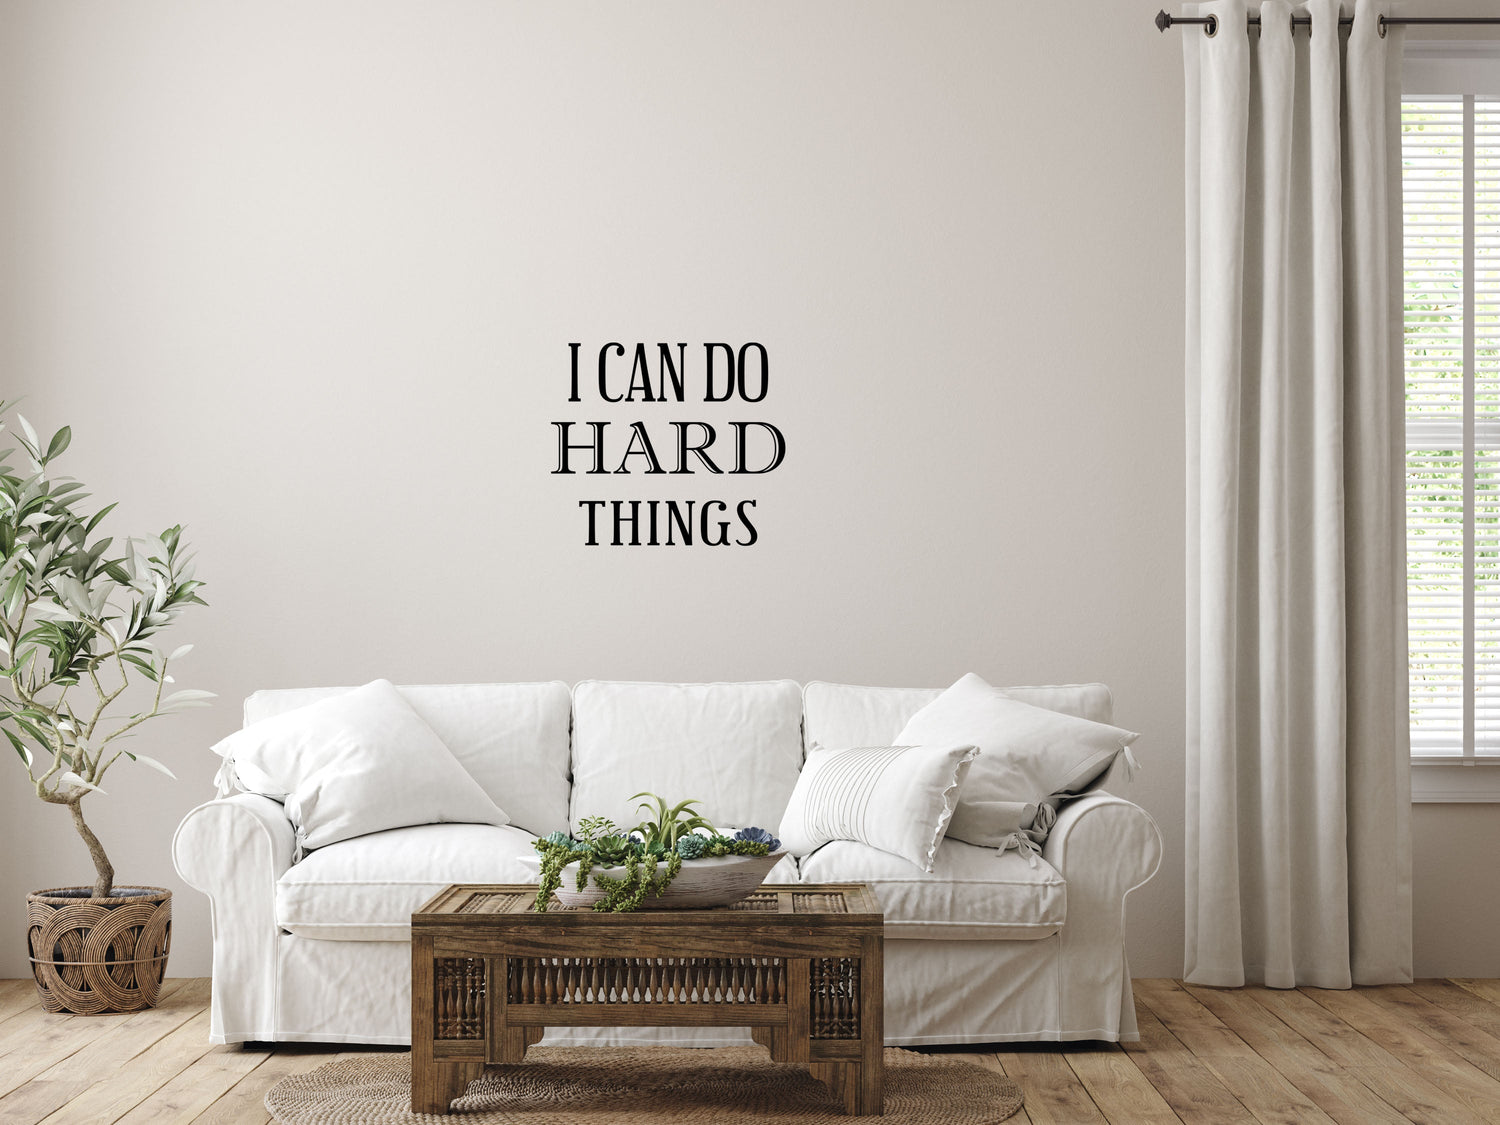 I Can Do Hard Things Vinyl Wall Decal - Motivational Decal I Can Do Hard Things Sign - Inspirational Quote Decal Vinyl Wall Decal Inspirational Wall Signs 